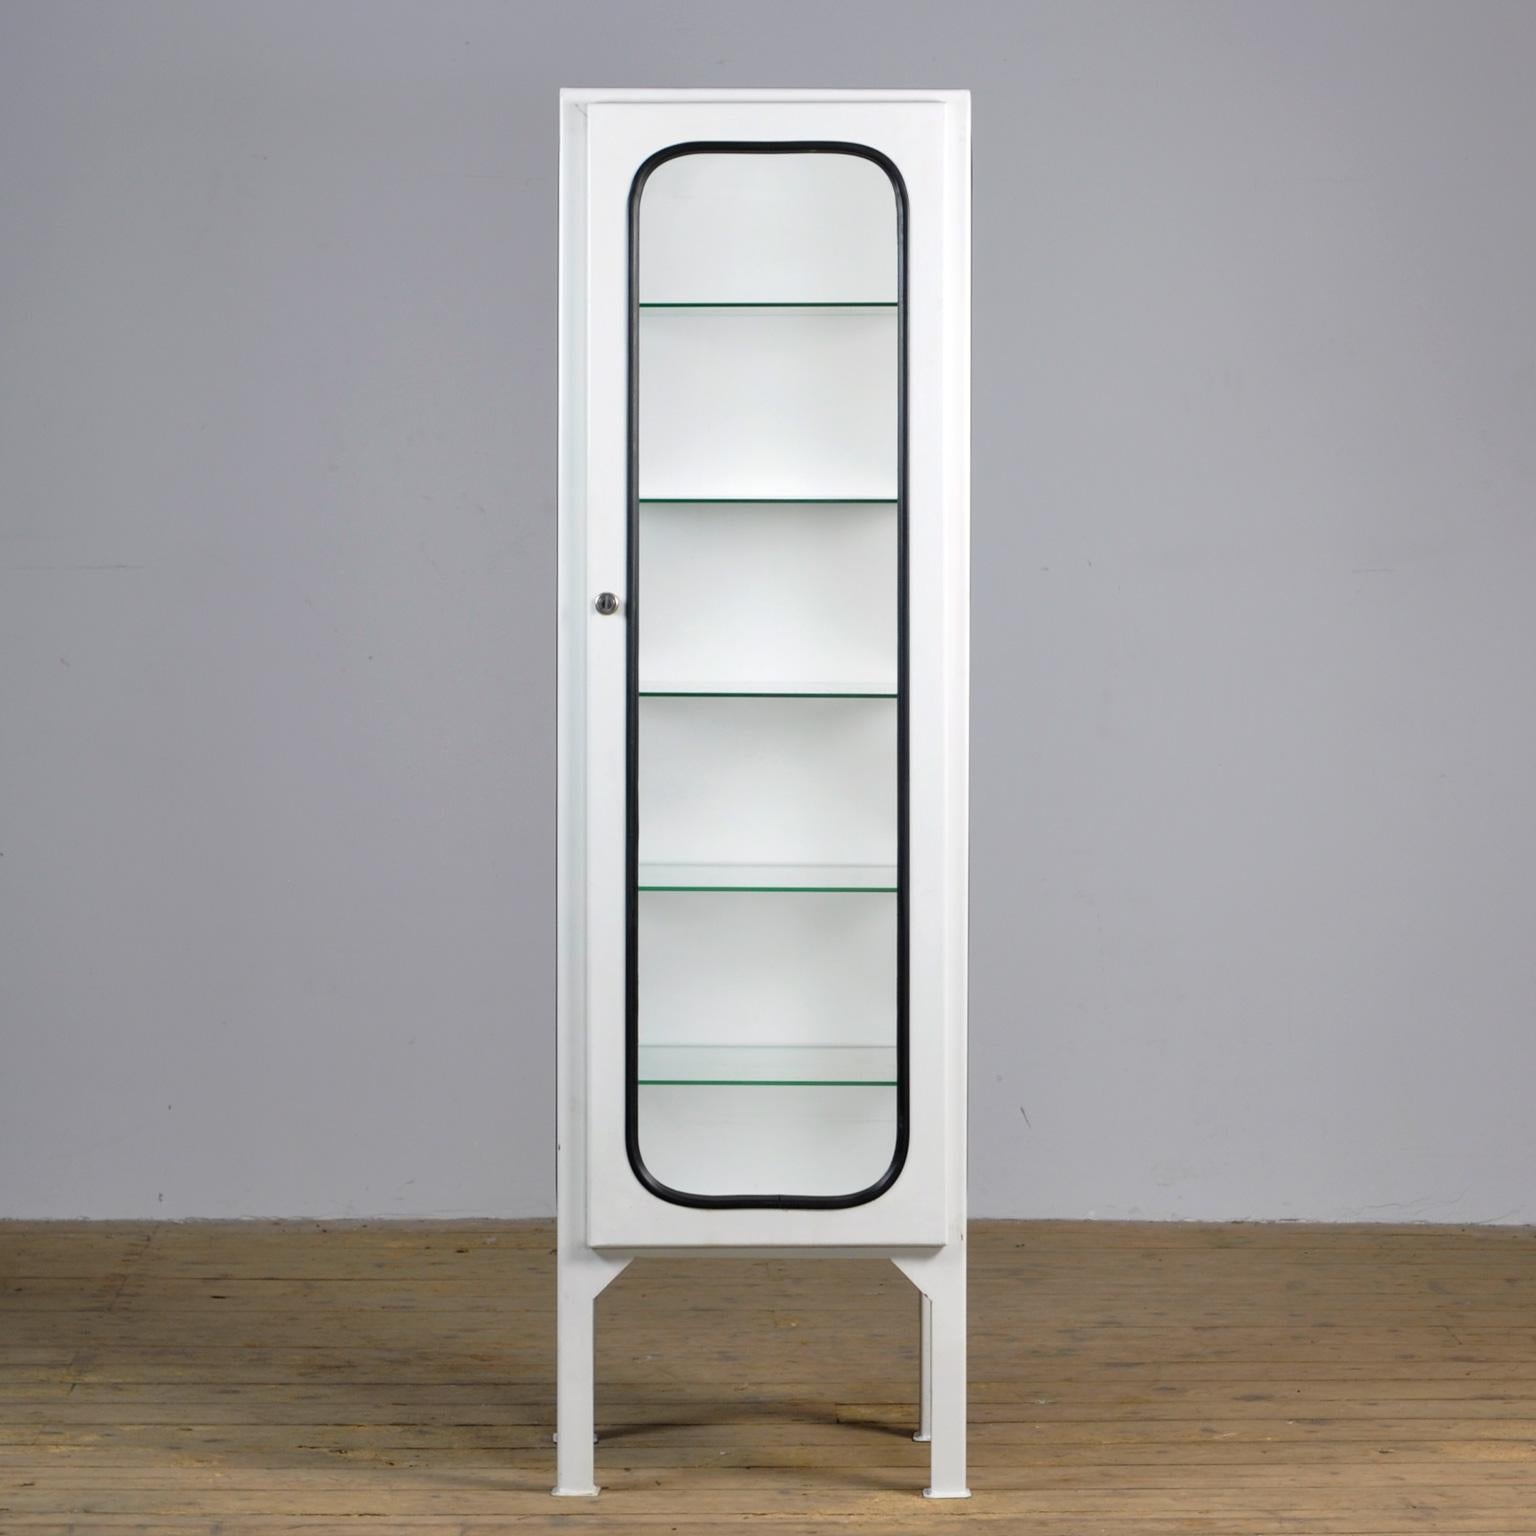 This medicine cabinet was designed in the 1970s and produced in 1975, in Hungary. It is made from steel and glass, with the glass panes held in place by a black rubber strip. The cabinet features five adjustable glass shelves and a functioning lock.